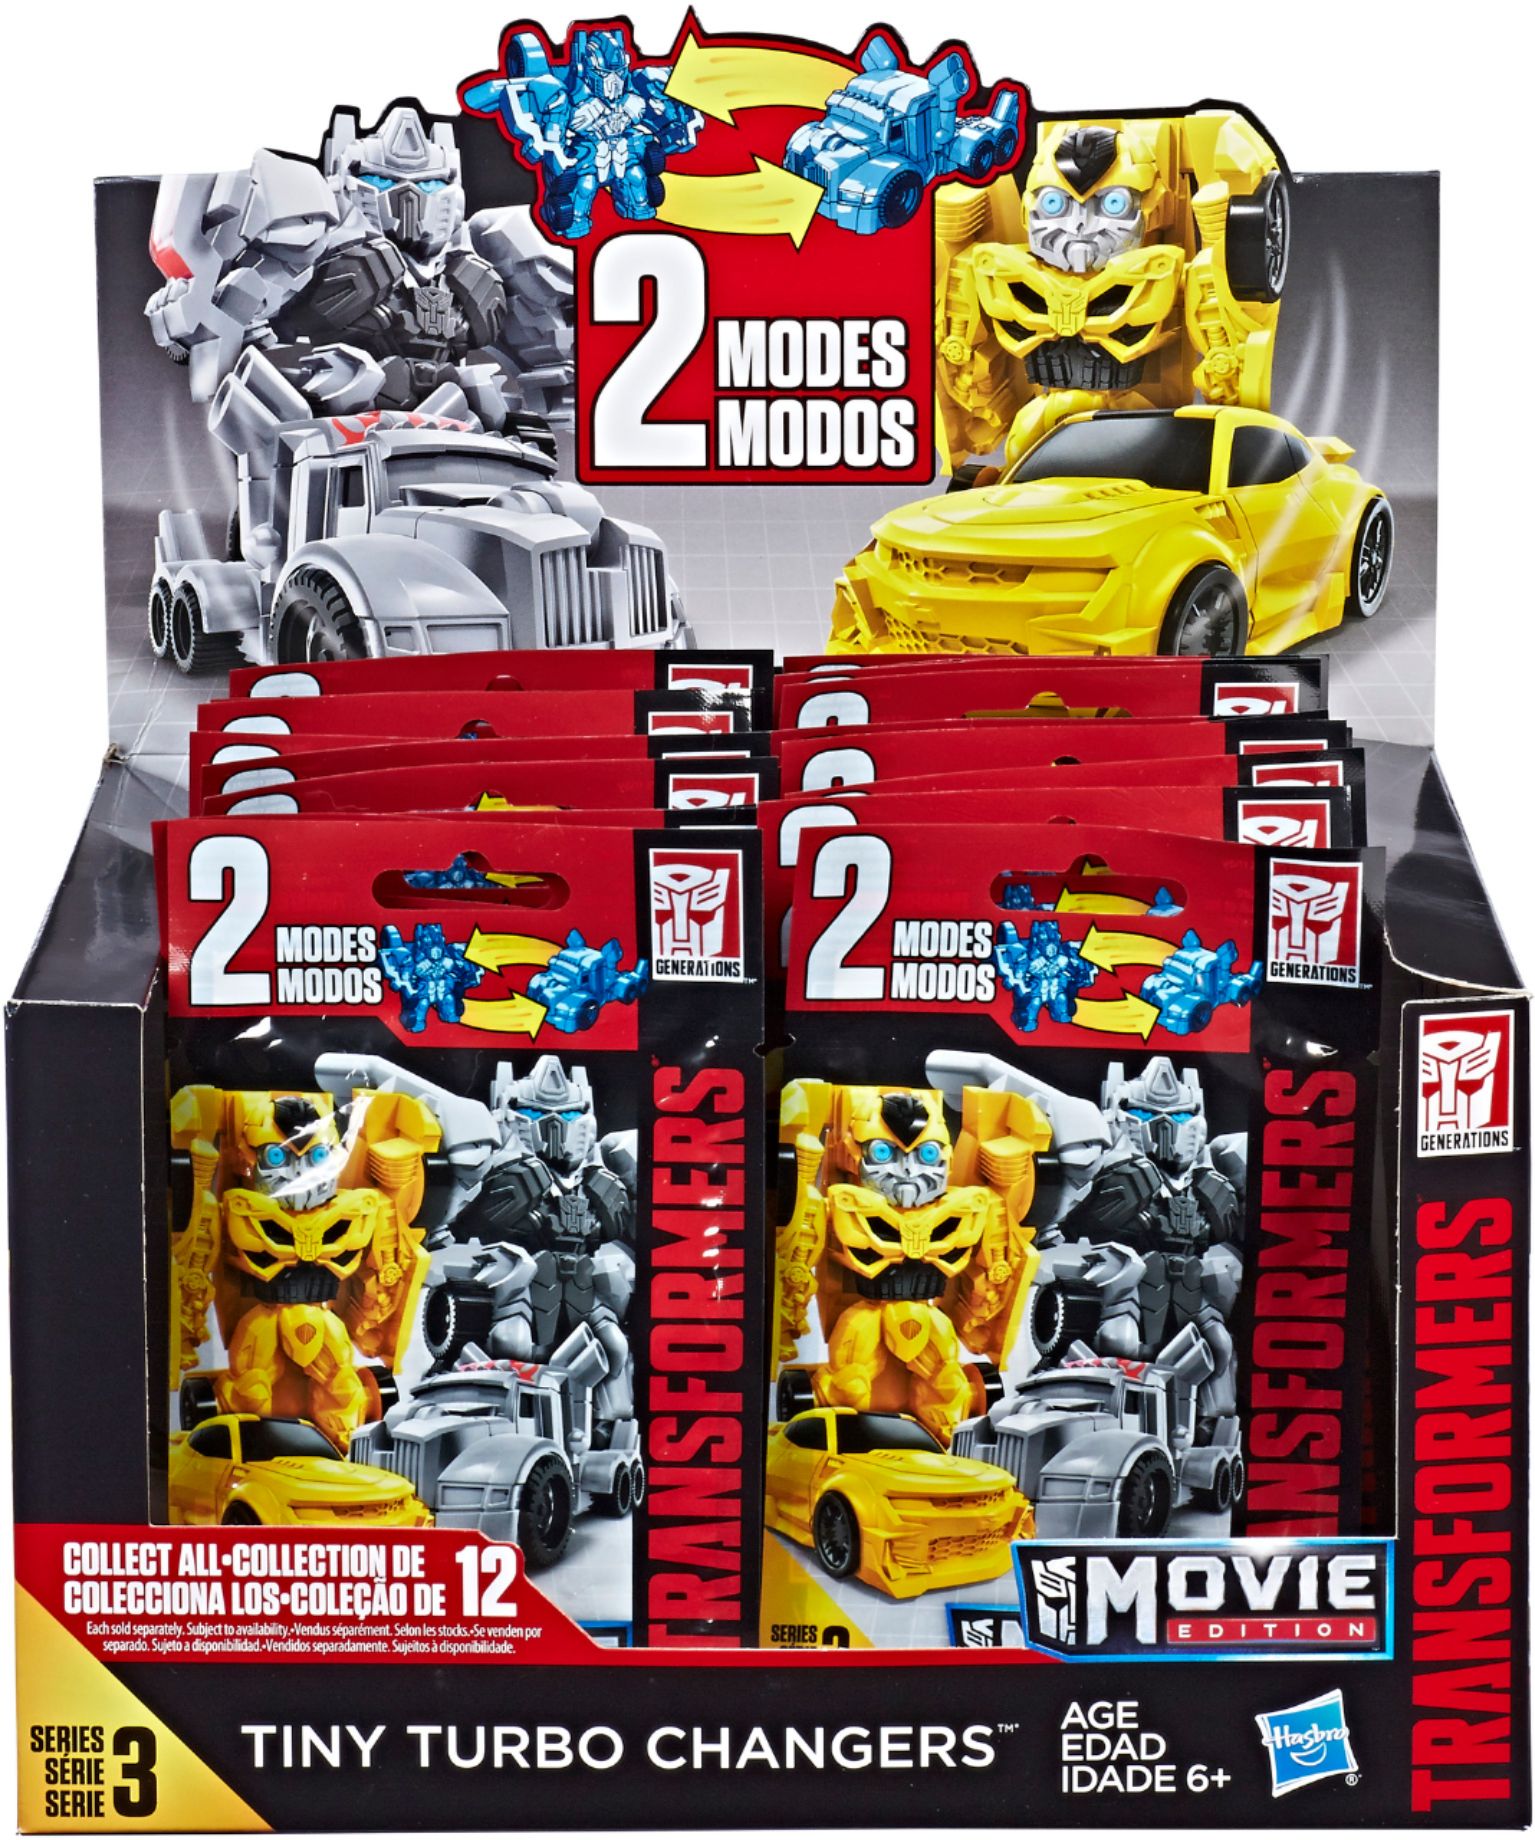 Bumblebee Movie Full Set 12 Blind Pack Transformers Tiny Turbo Changers Series 4 